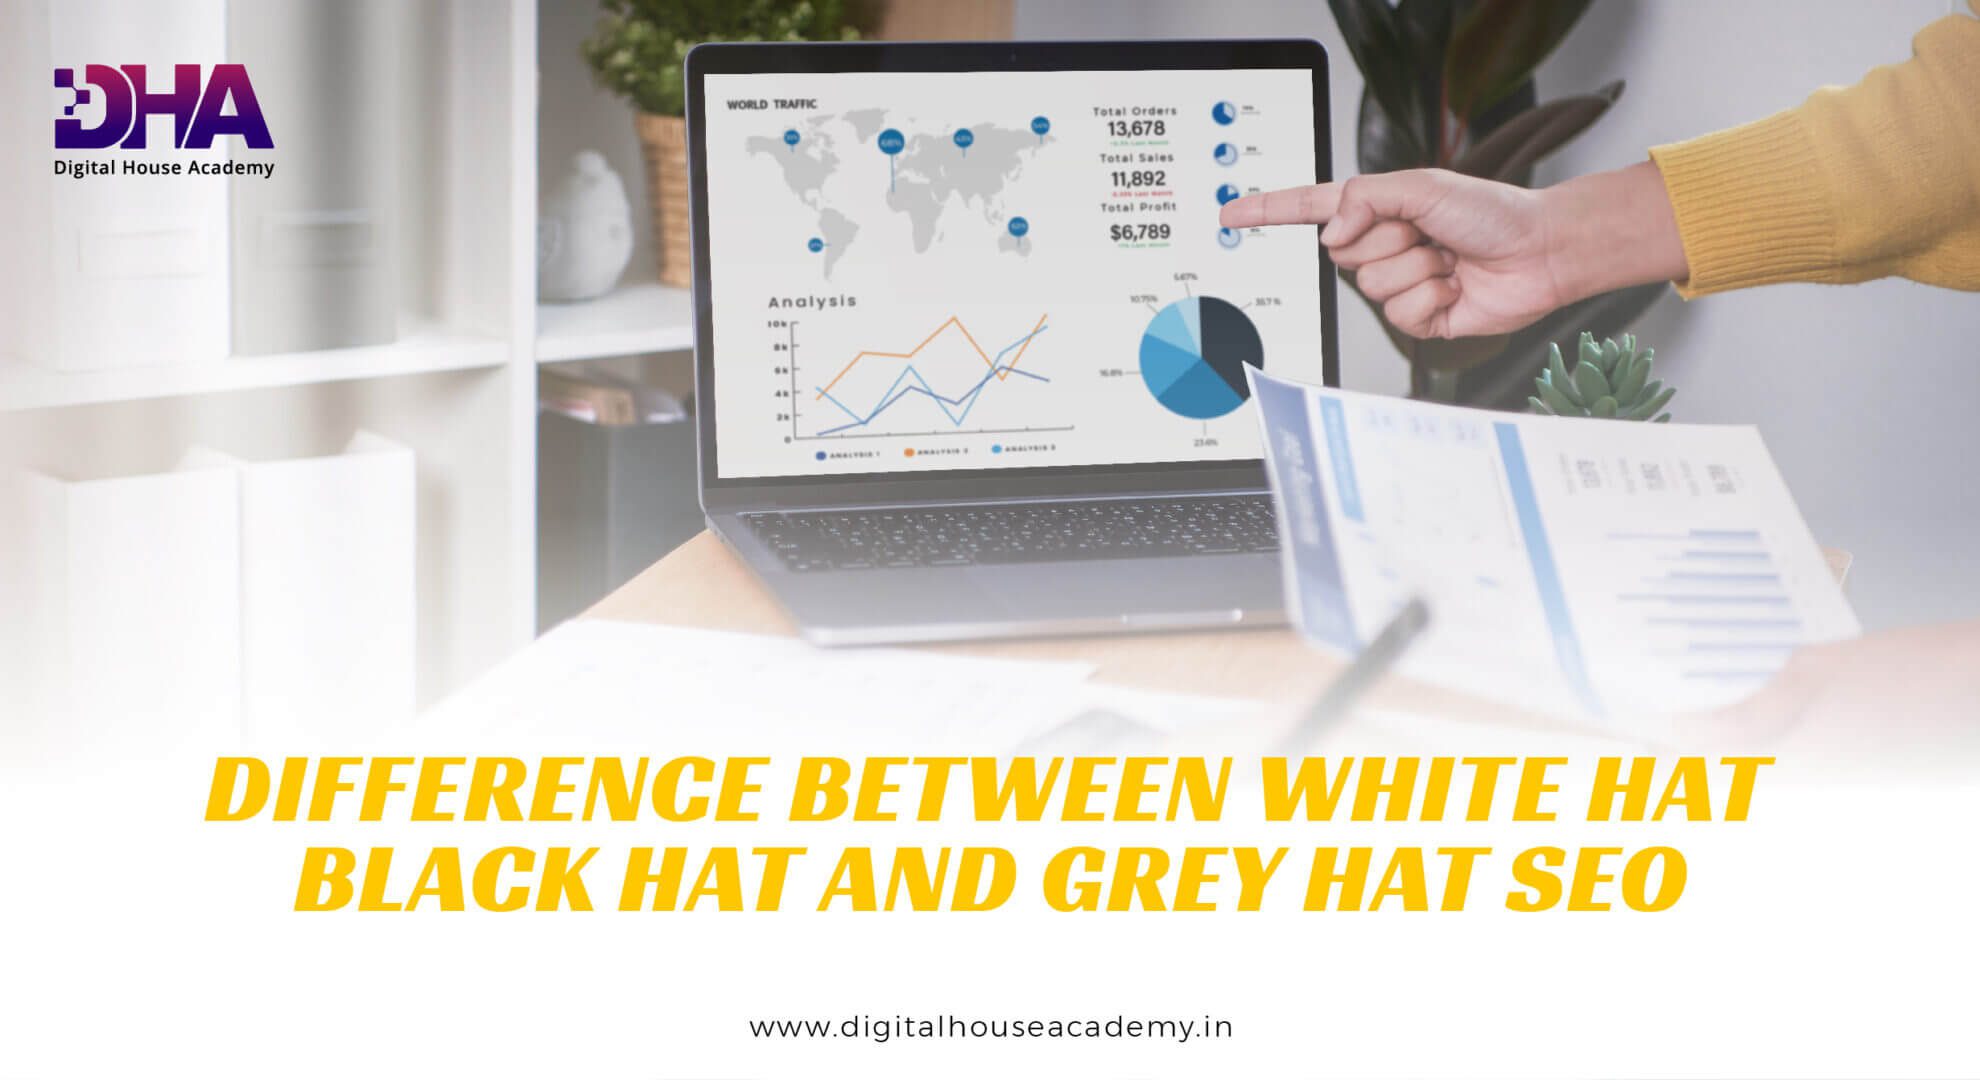 Difference between White Hat, Black Hat and Grey Hat SEO